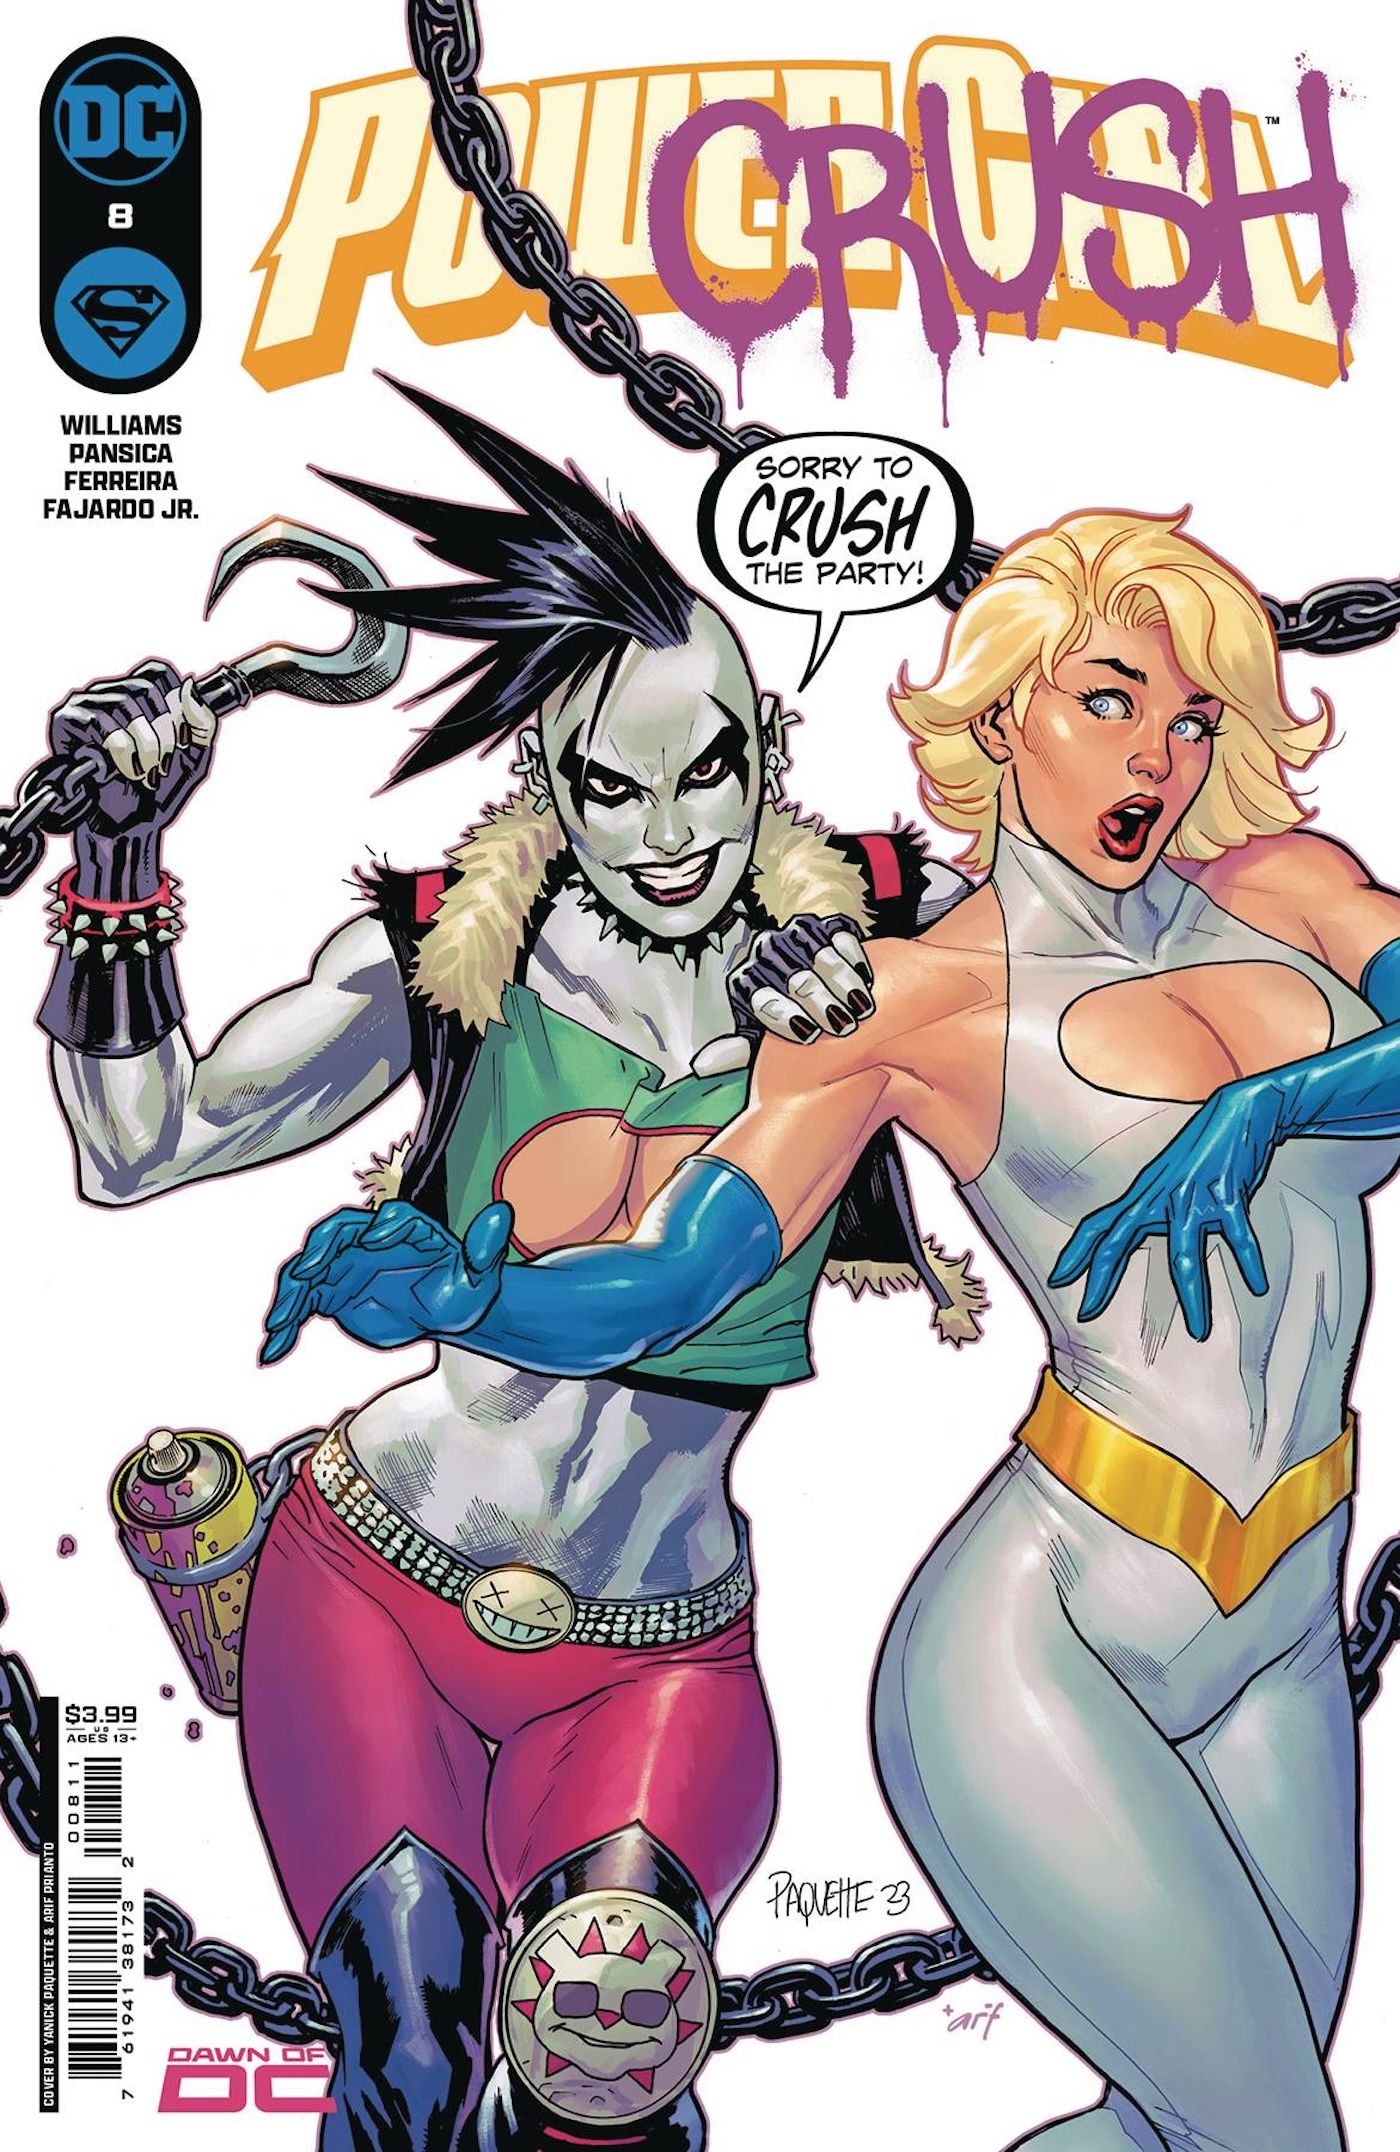 Power Girl 8 Main Cover: Crush pushes Power Girl out of frame.